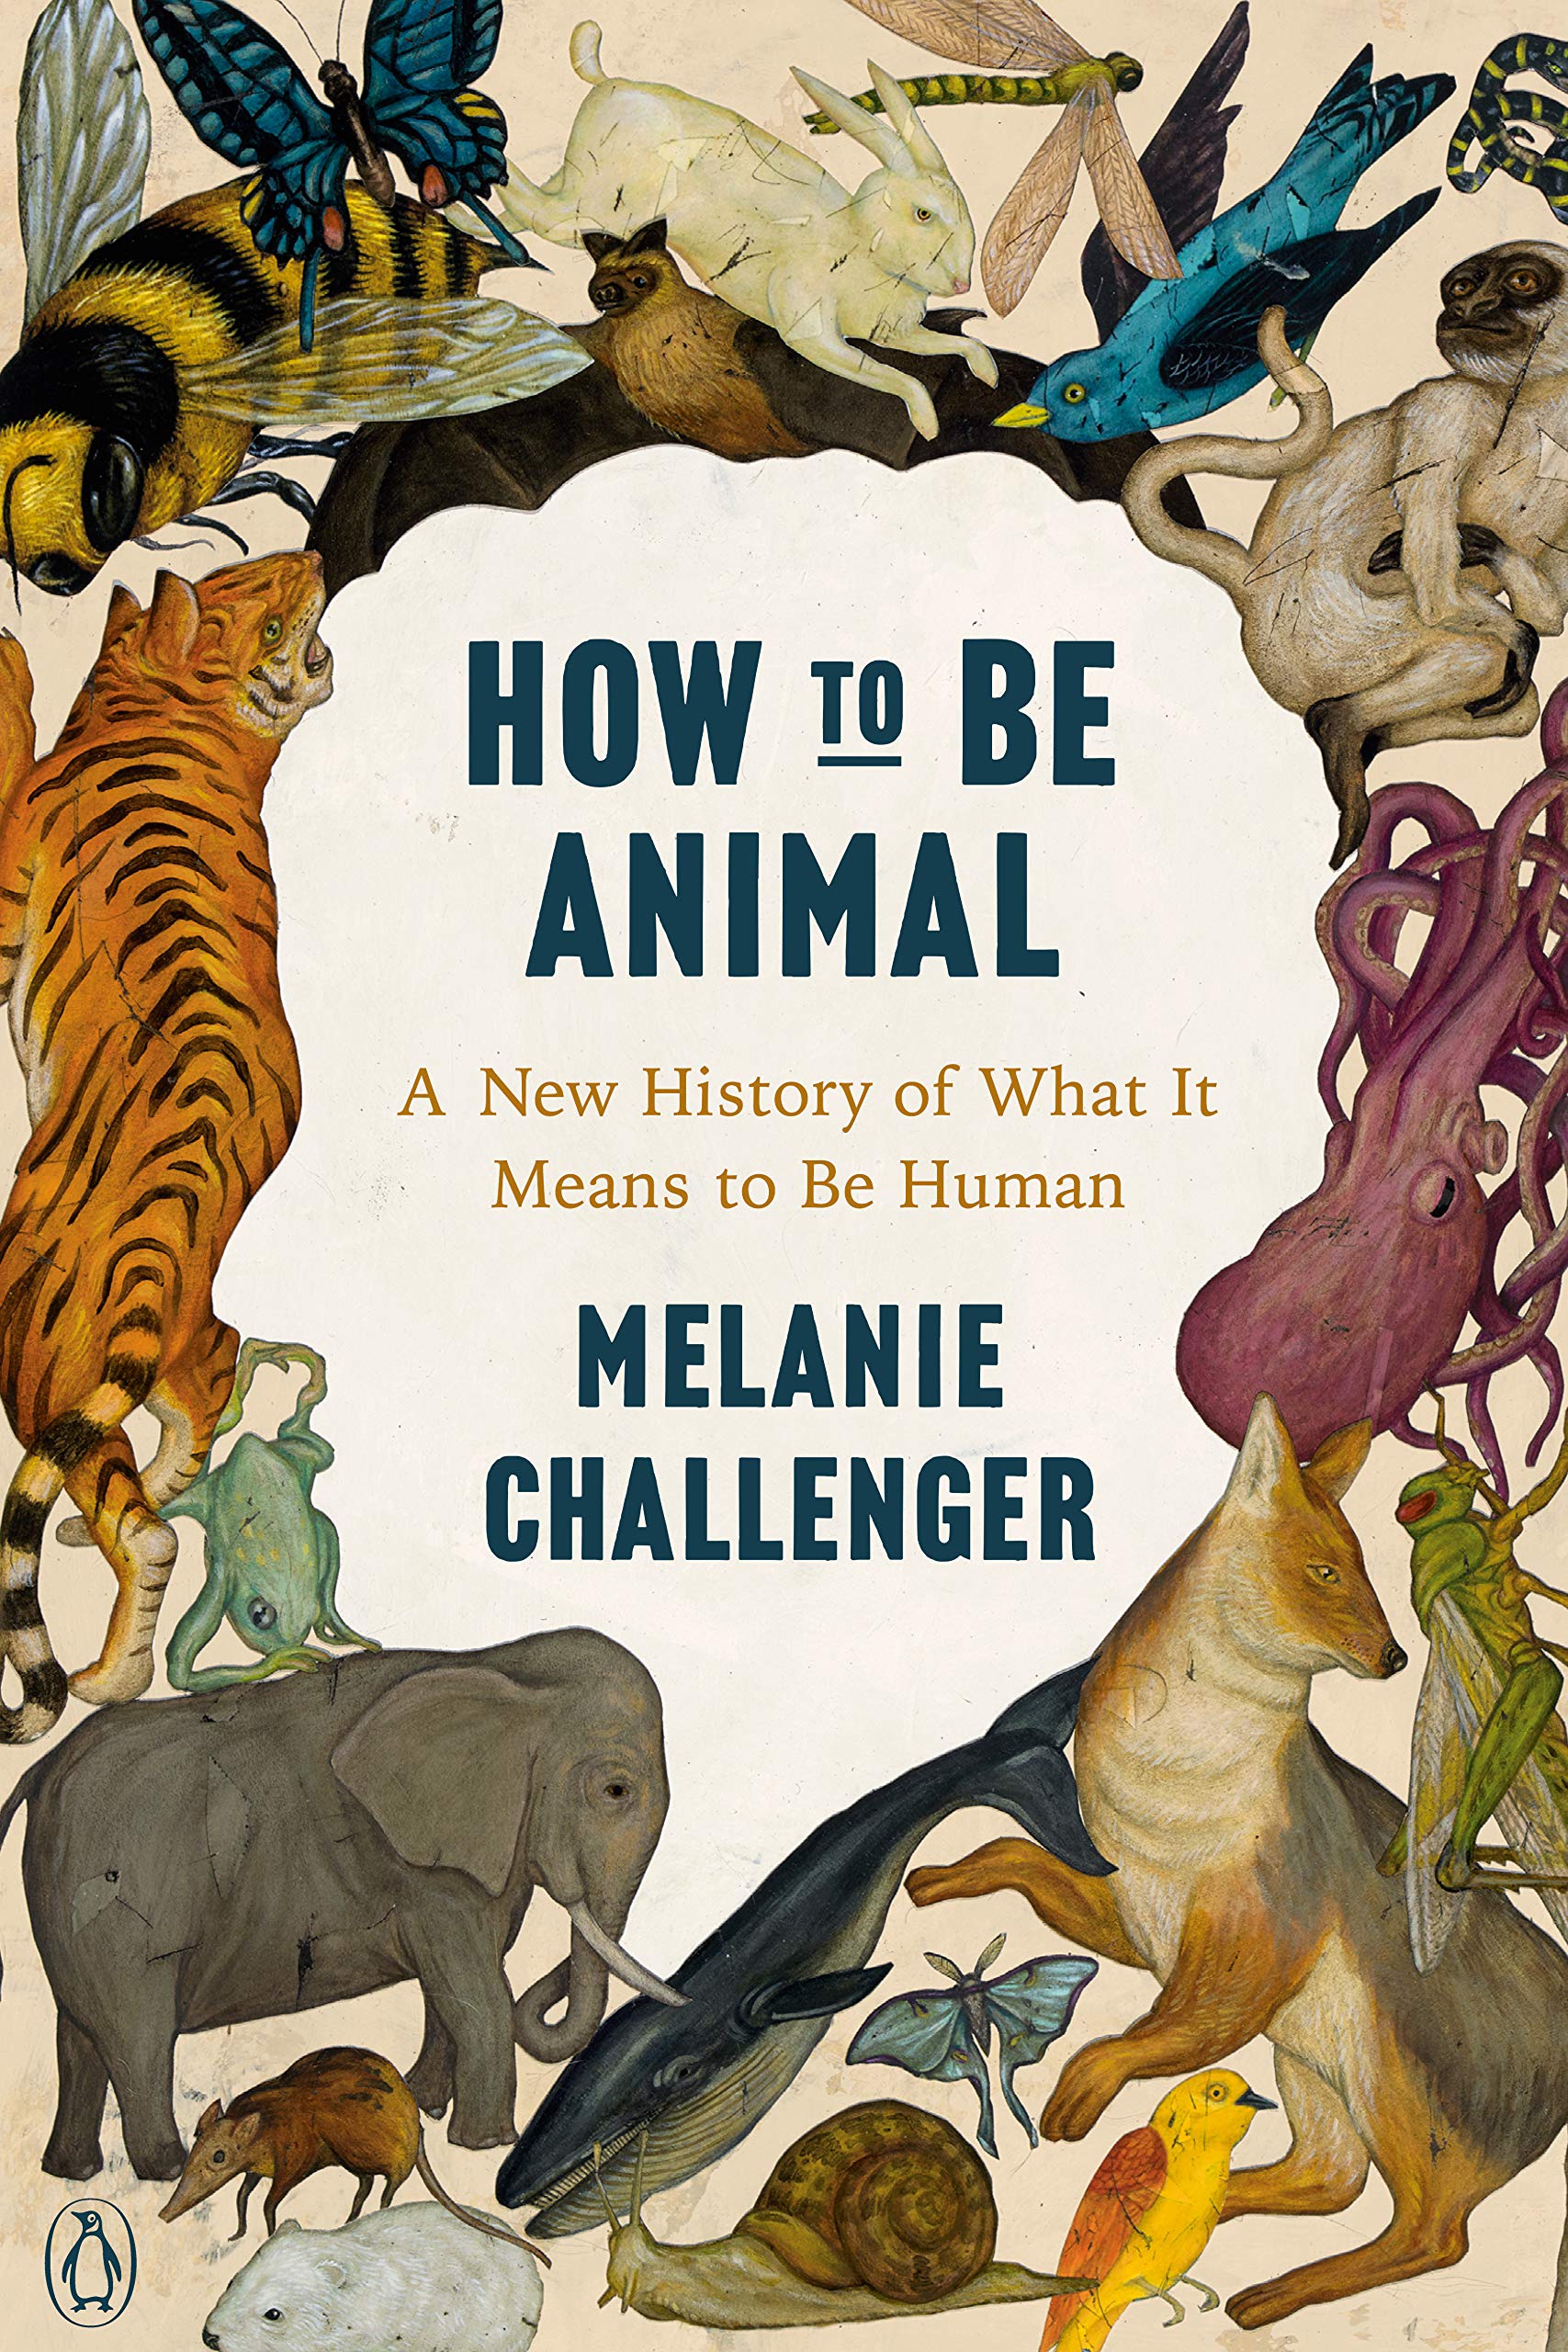 The cover of How to Be Animal: A New History of What It Means to Be Human